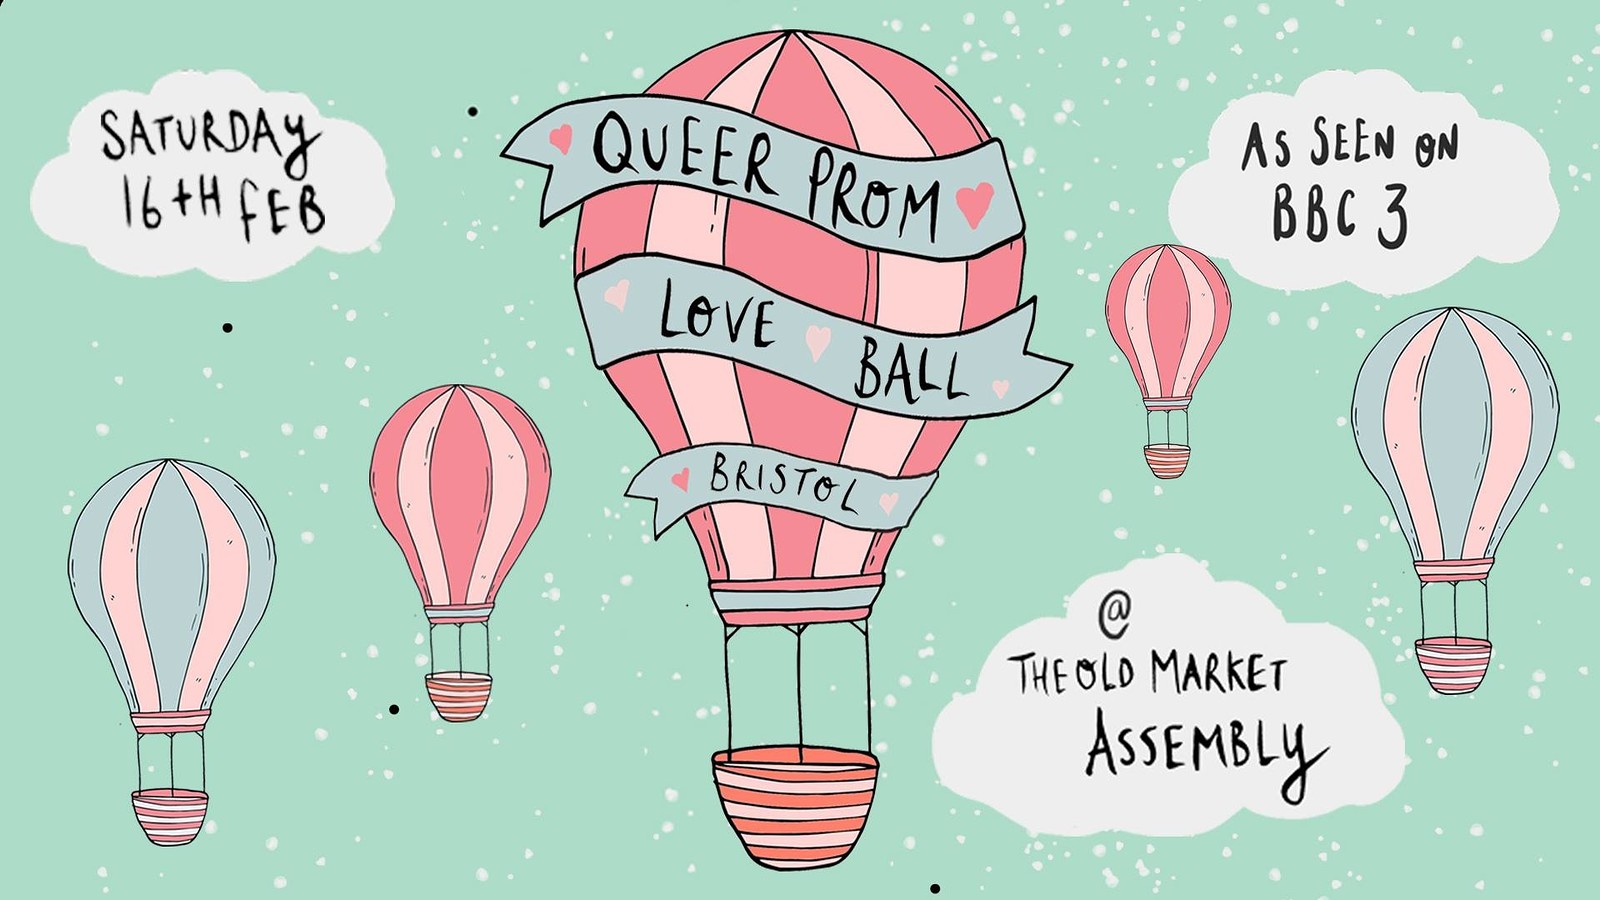 Queer Prom Bristol // Love Ball at The Old Market Assembly